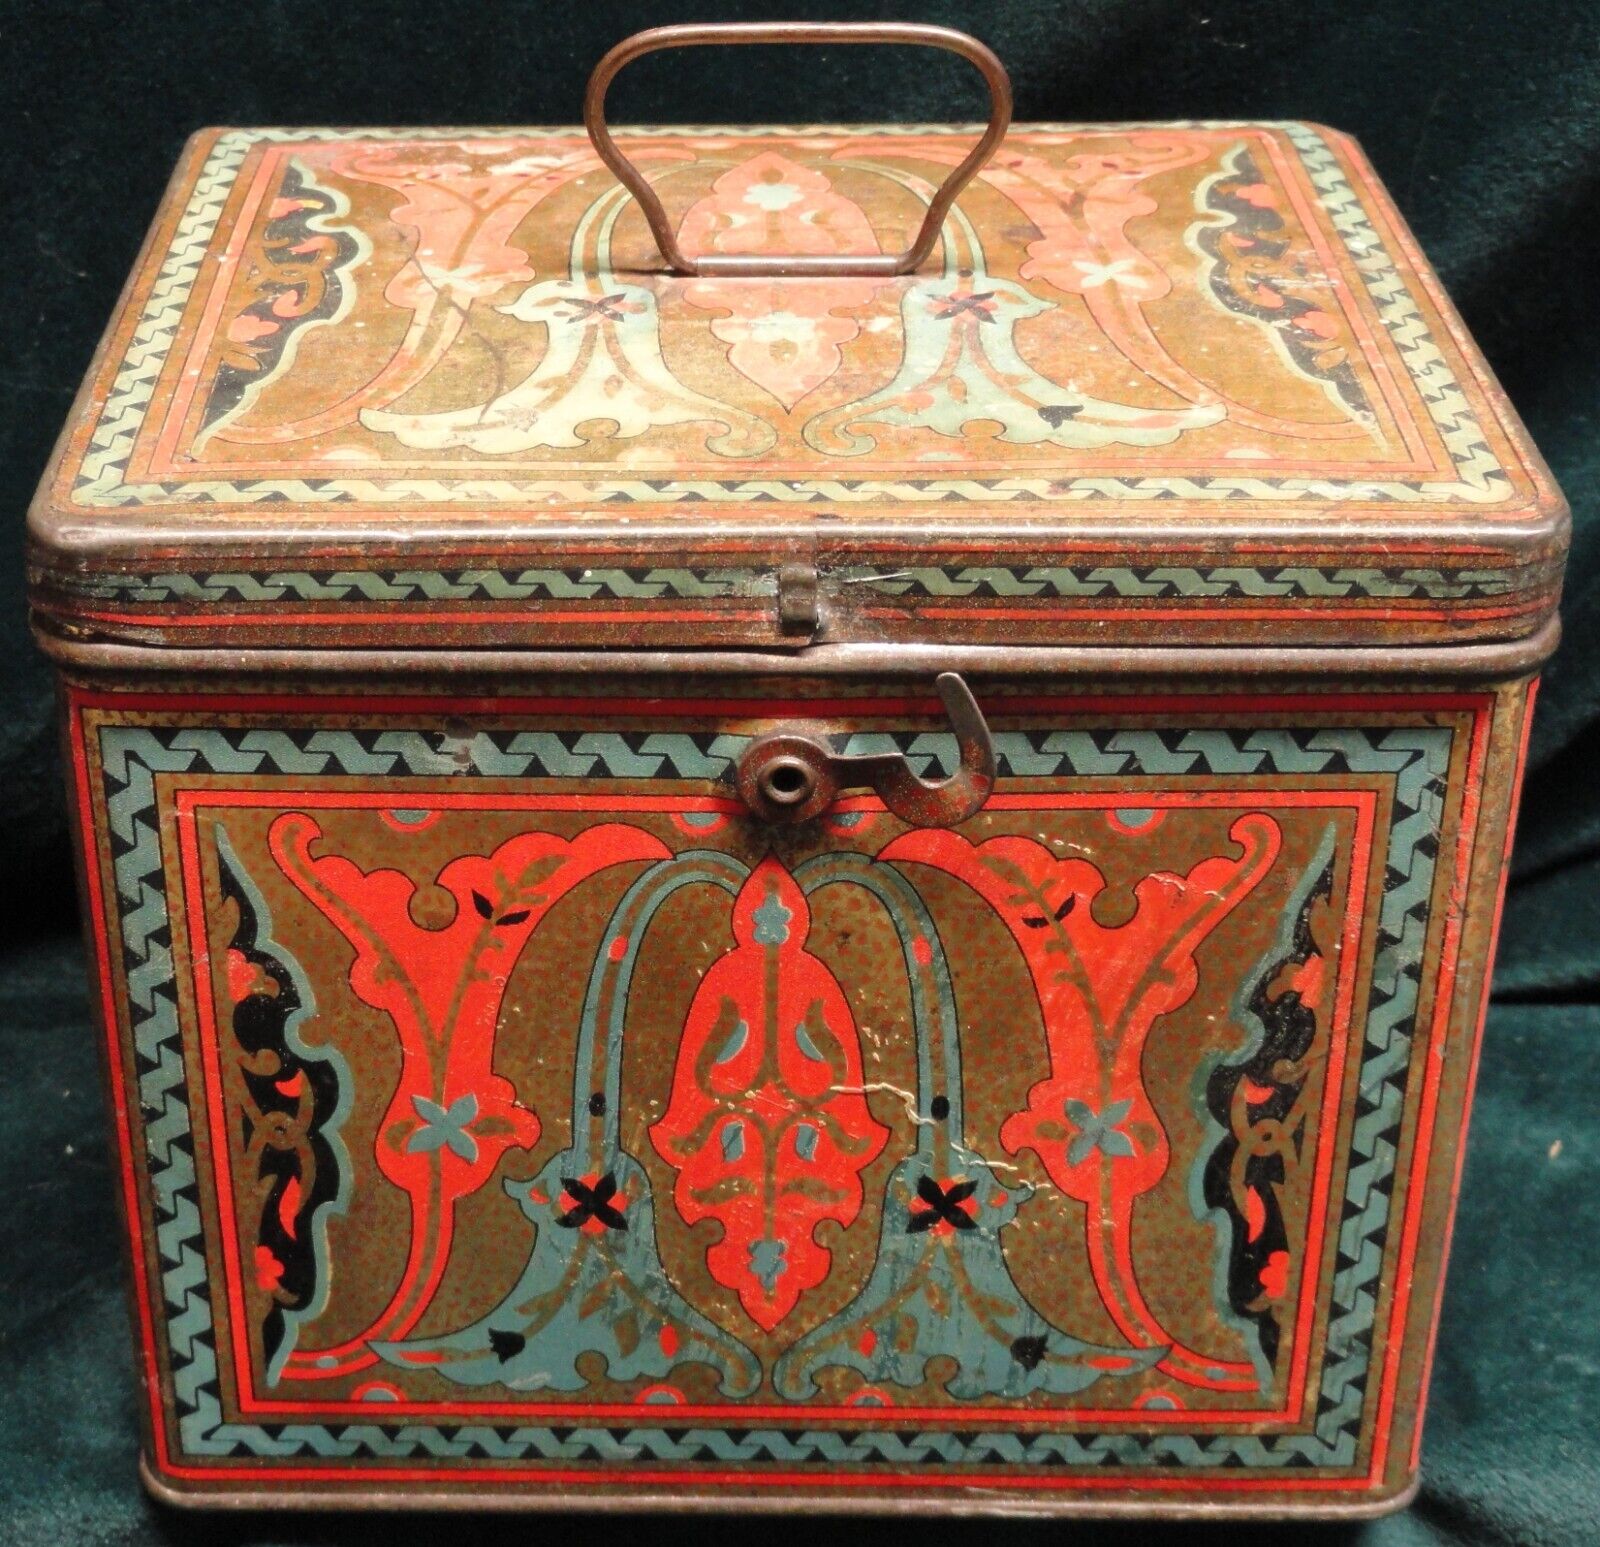 VTG 1920s Uneeda NBC Biscuit Tin Box Hinged Red Blue Art Nouveau Great Colors